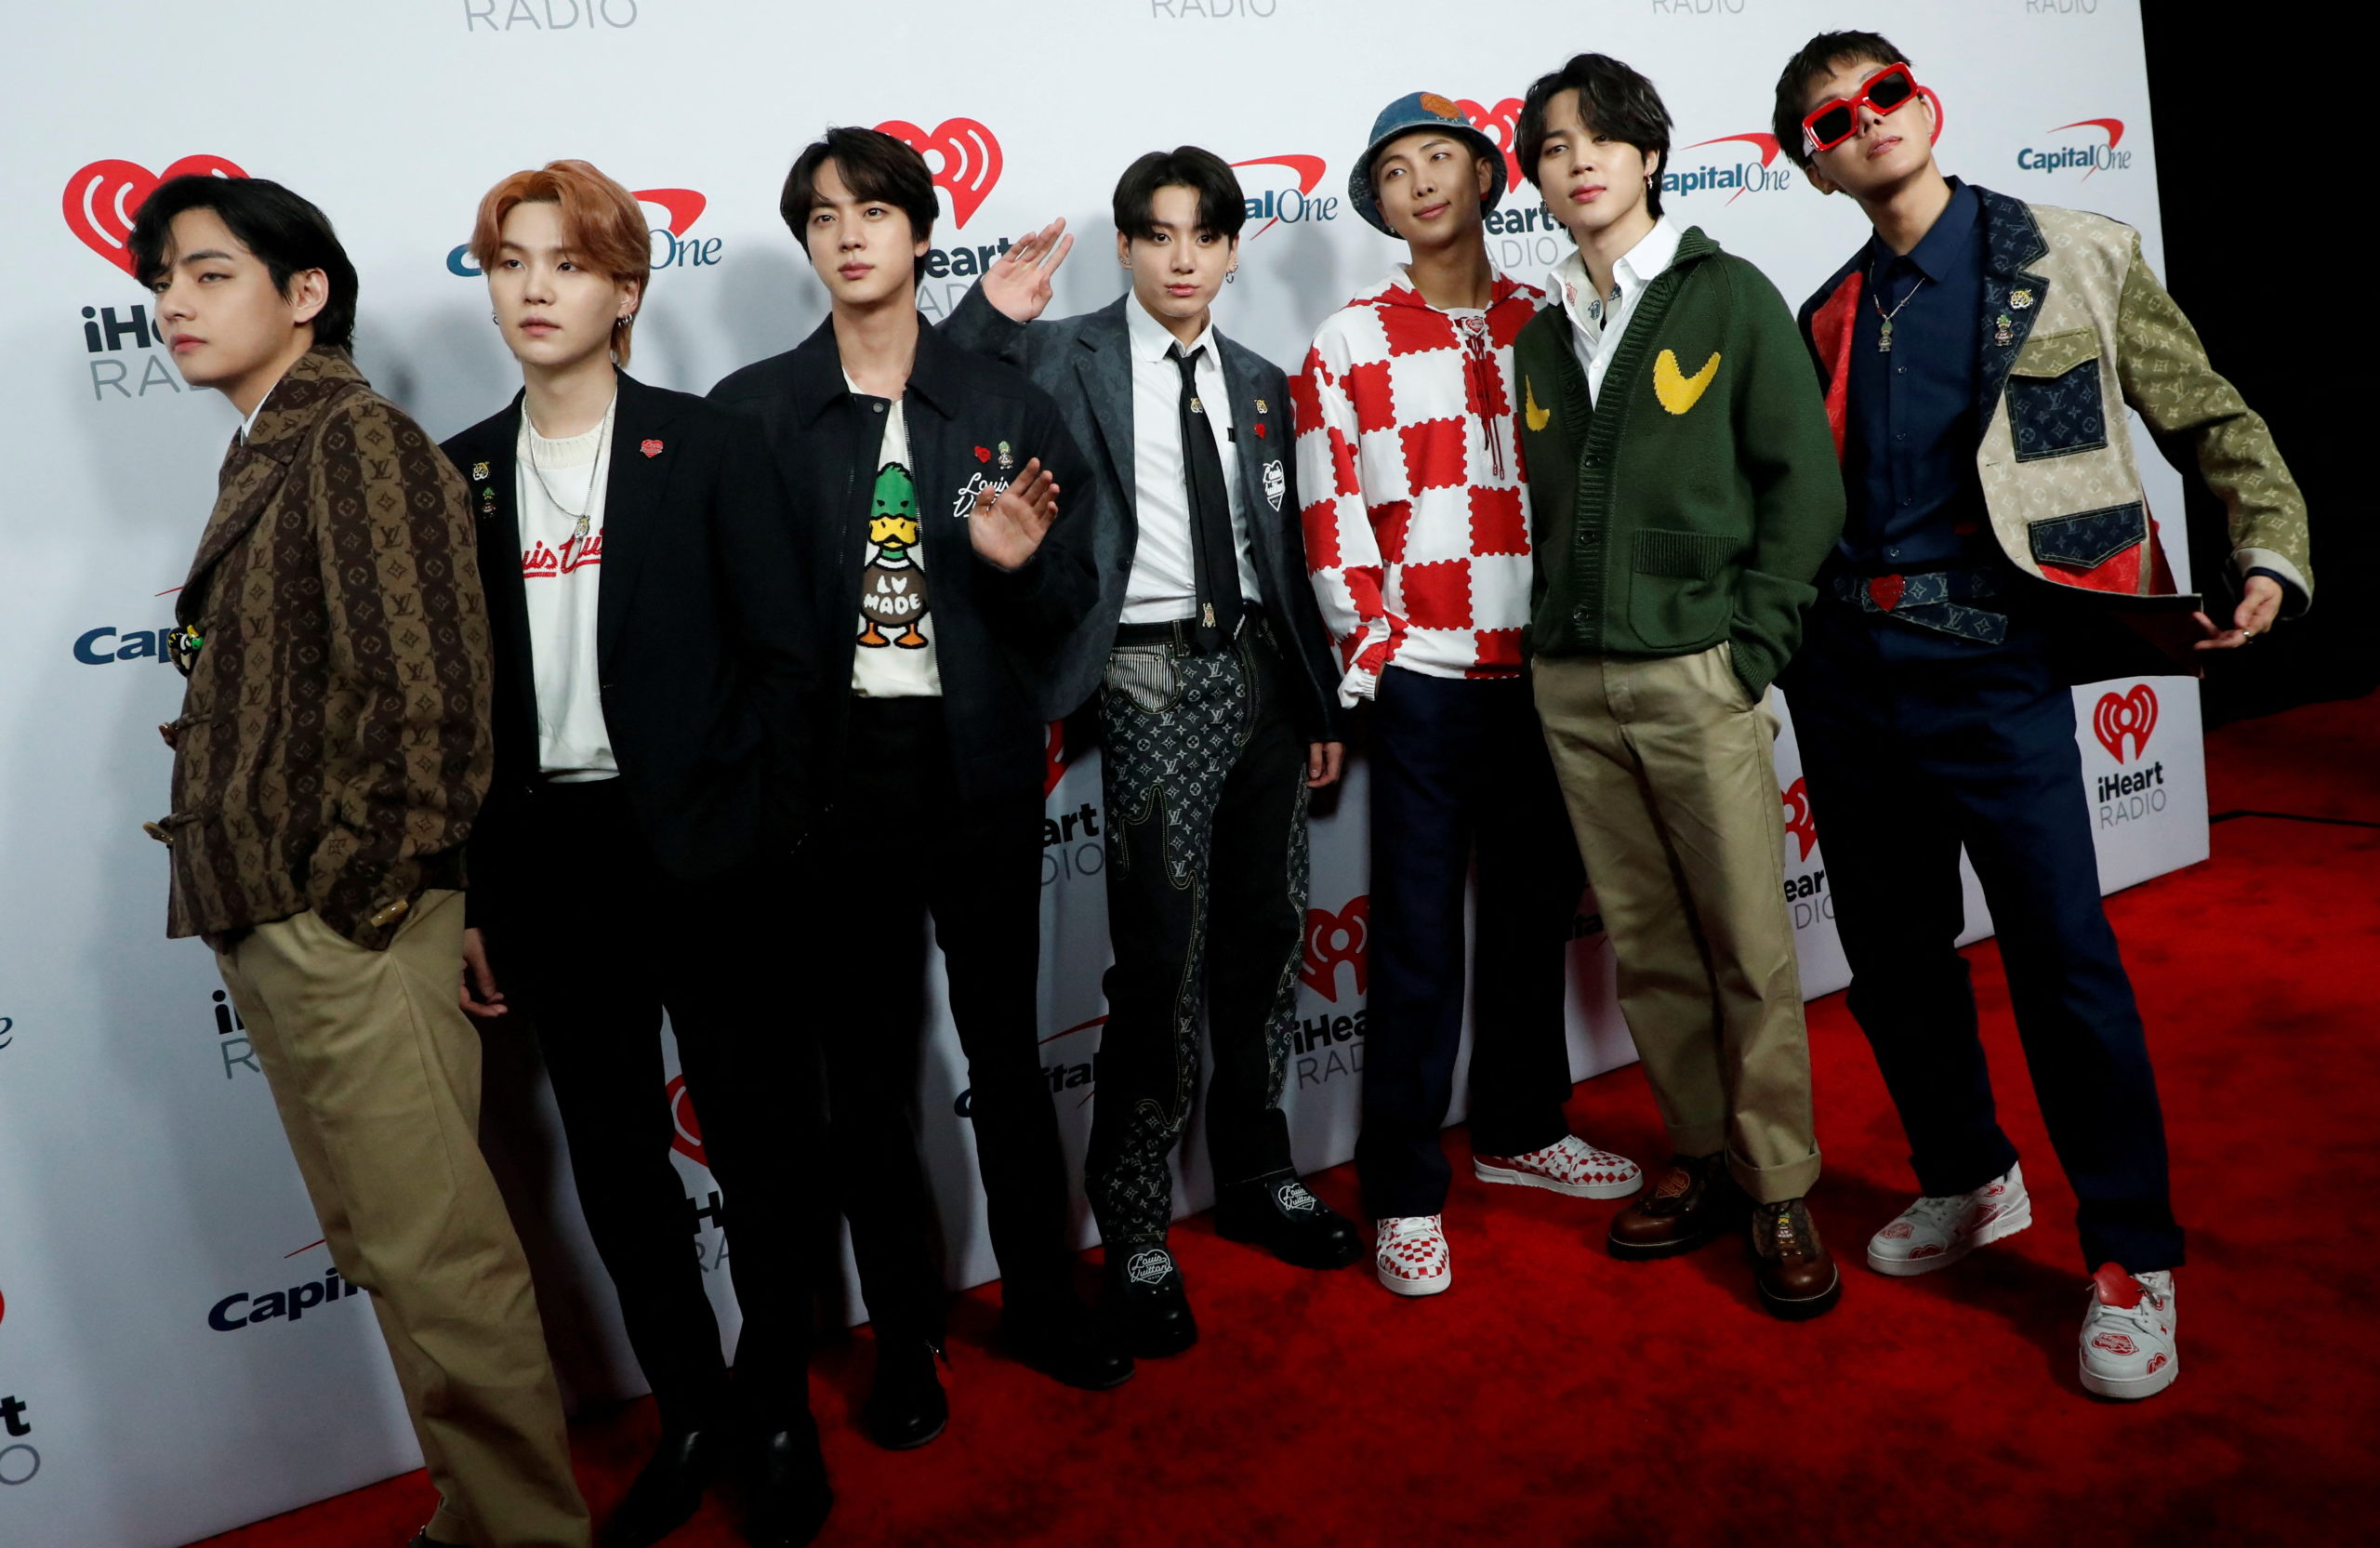 BTS poses at the carpet during arrivals ahead of iHeartRadio Jingle Ball concert at The Forum, in Inglewood, California, U.S., December 3, 2021. REUTERS/Mario Anzuoni